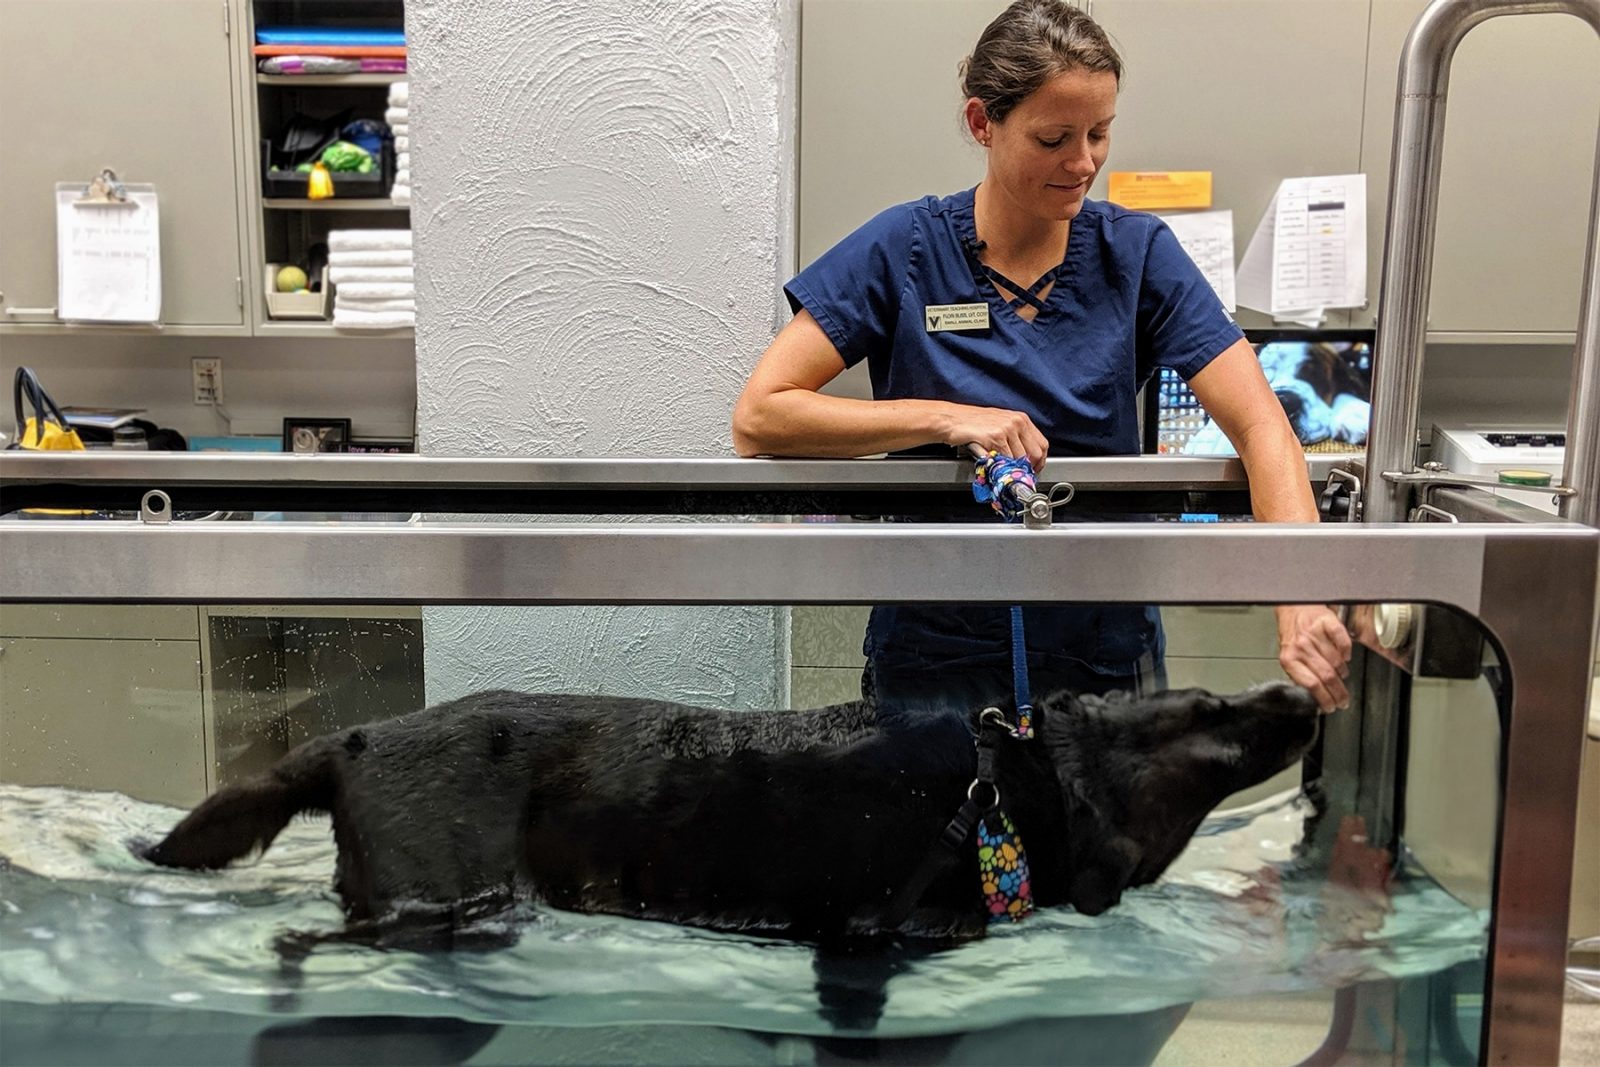 Flori Bliss, a licensed veterinary technician who completed the Canine Rehabilitation Certificate Program, works with Saint in the underwater treadmill.